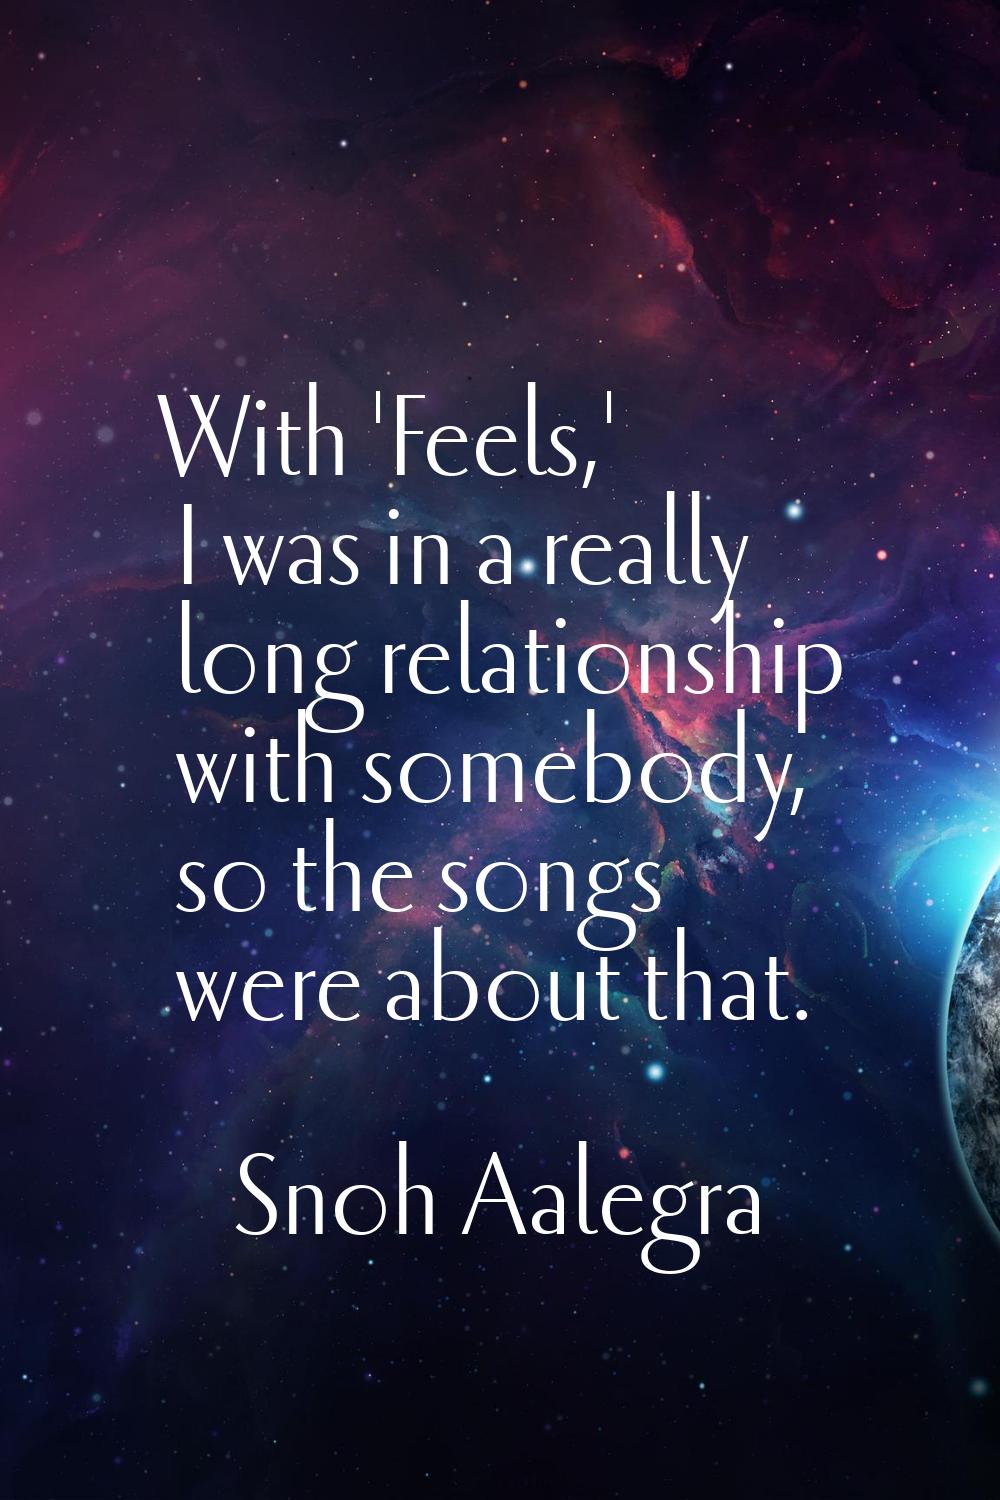 With 'Feels,' I was in a really long relationship with somebody, so the songs were about that.